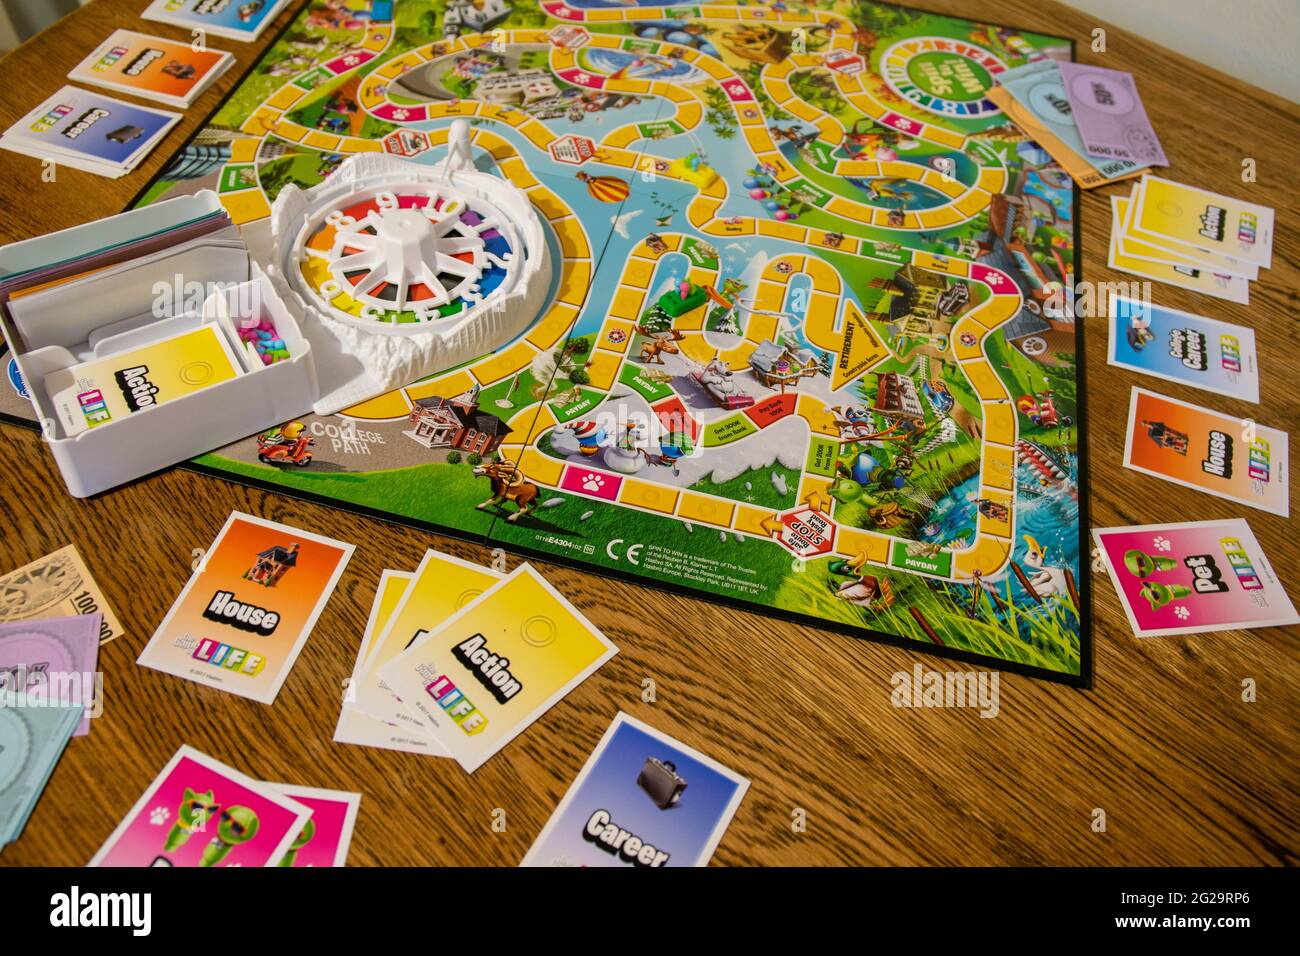 Shop Hasbro The Game Of Life Board Game For Families And Kids